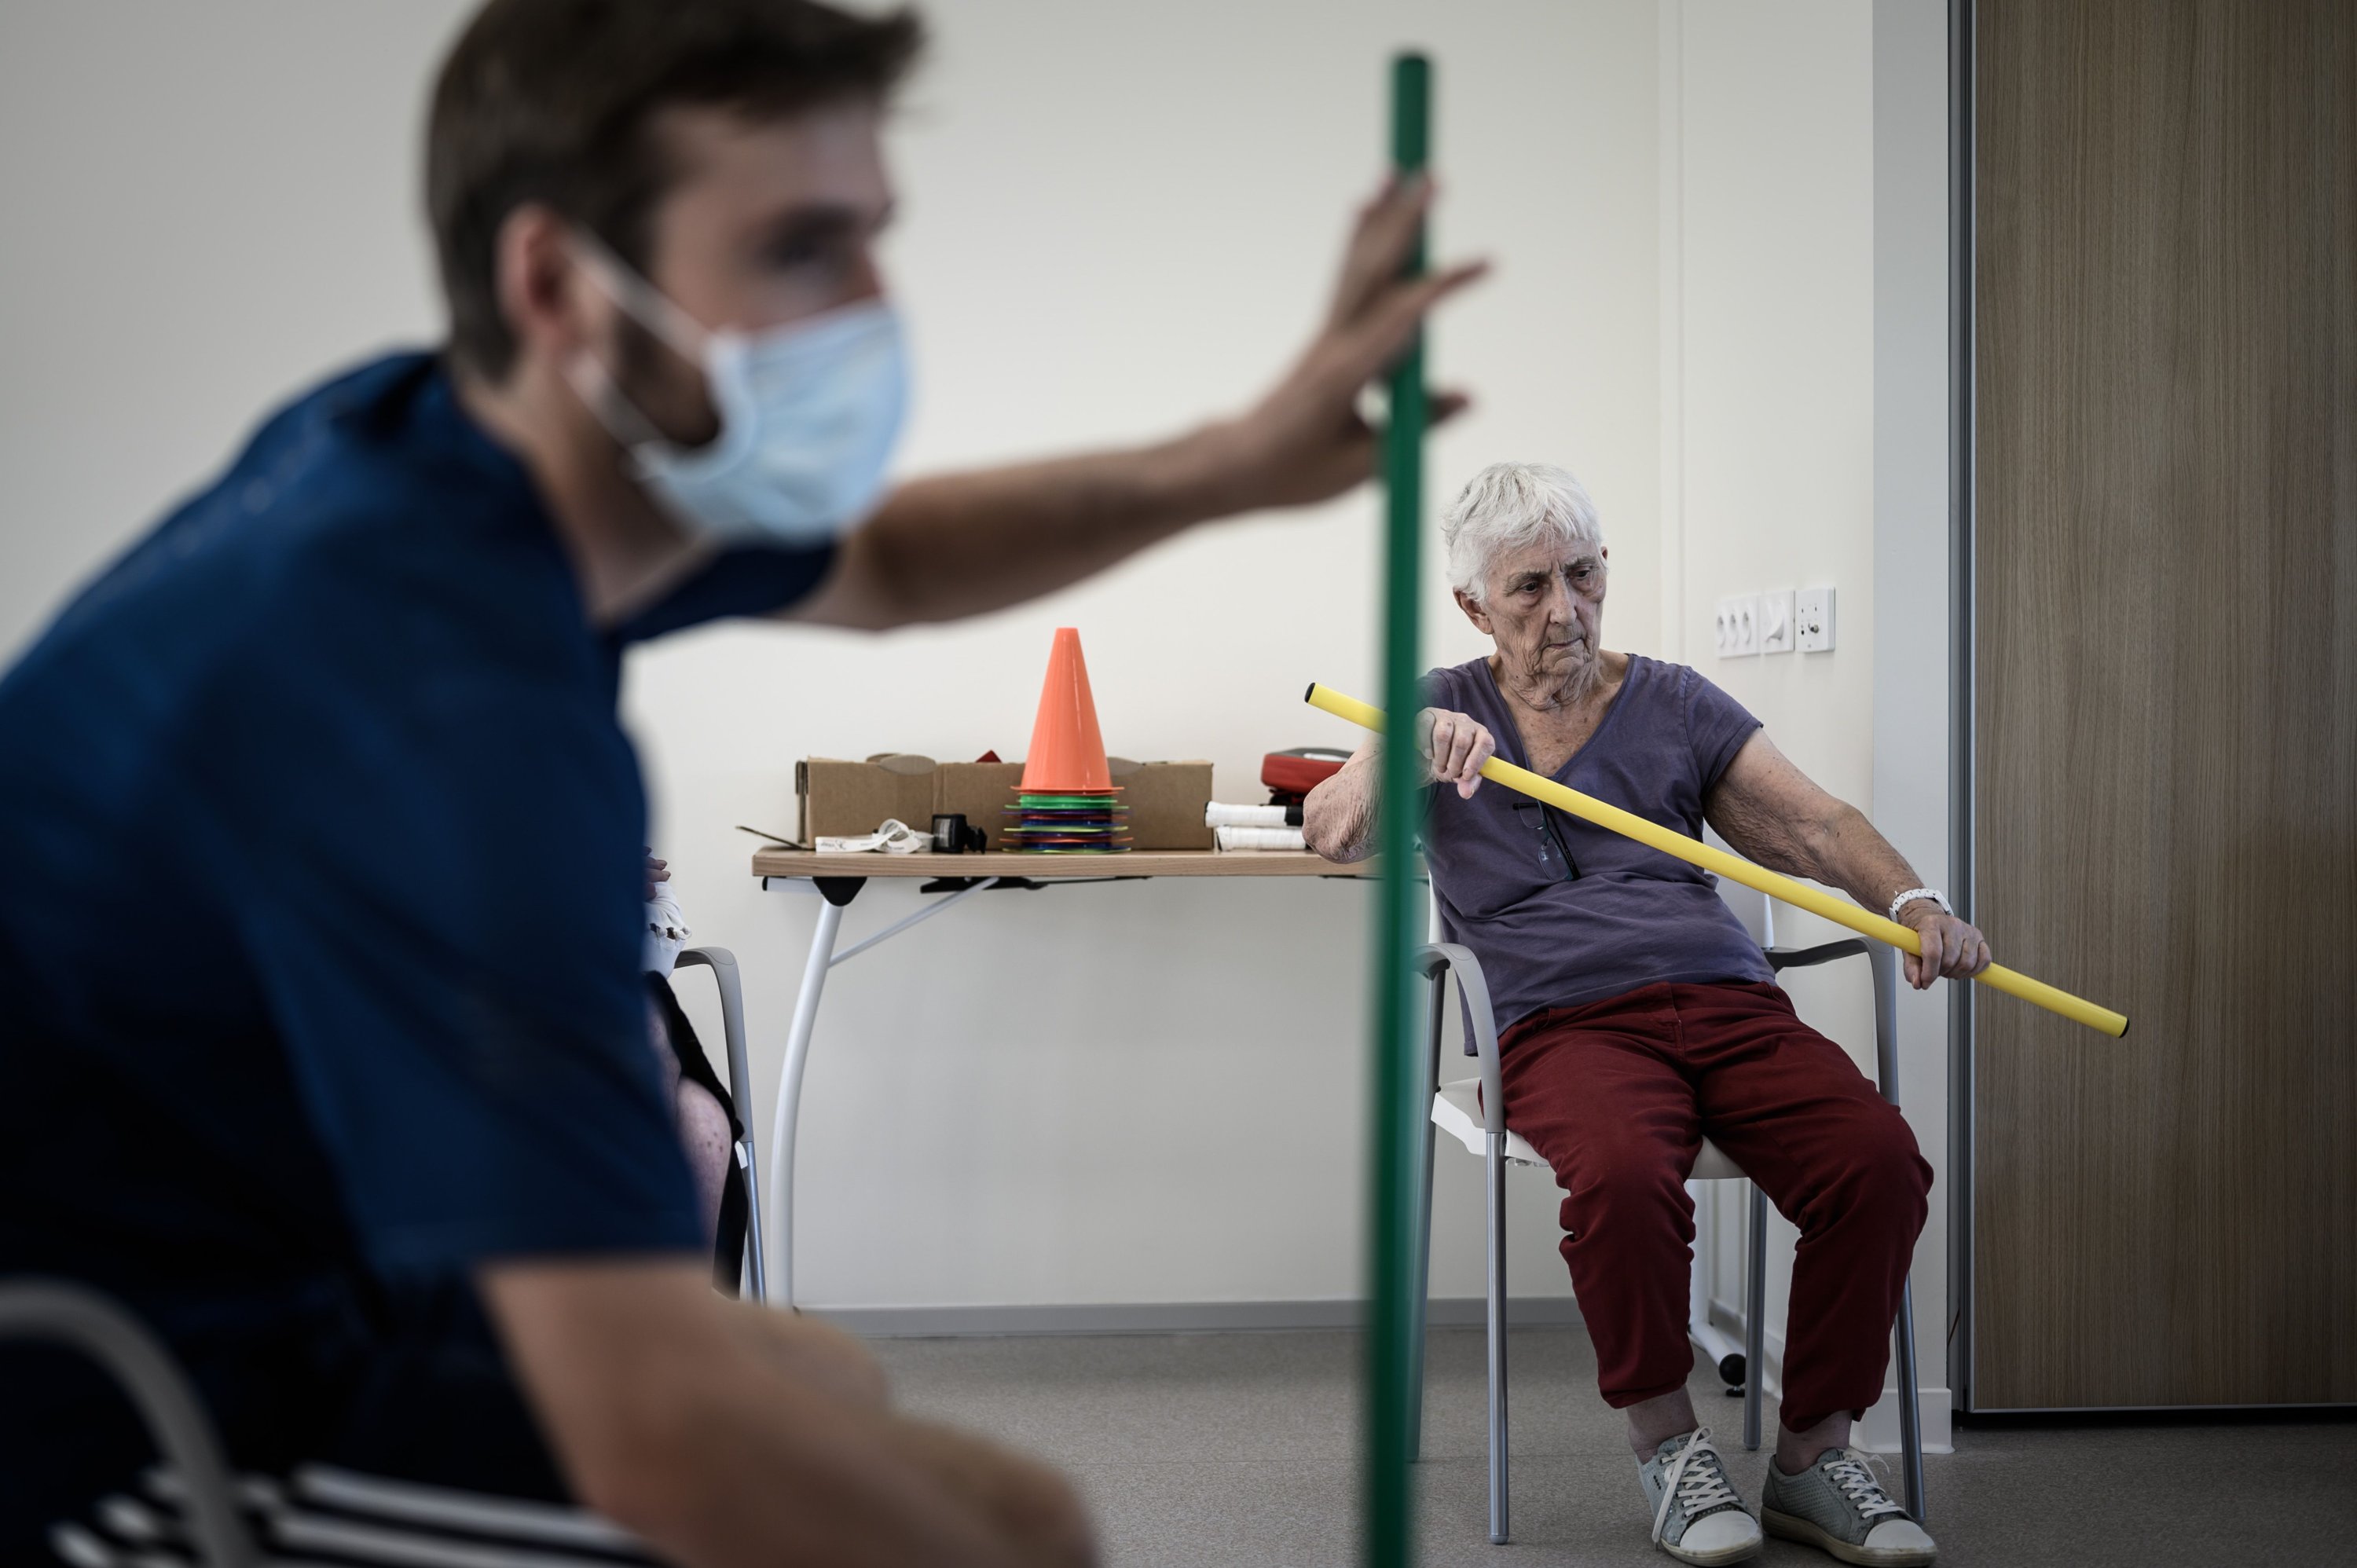 A volunteer provids guidance to Alzheimer’s patients during physical activity in the village Landais Alzheimer site for Alzheimer’s patients in Dax, southwestern France, Sept. 9, 2020. (AFP Photo)